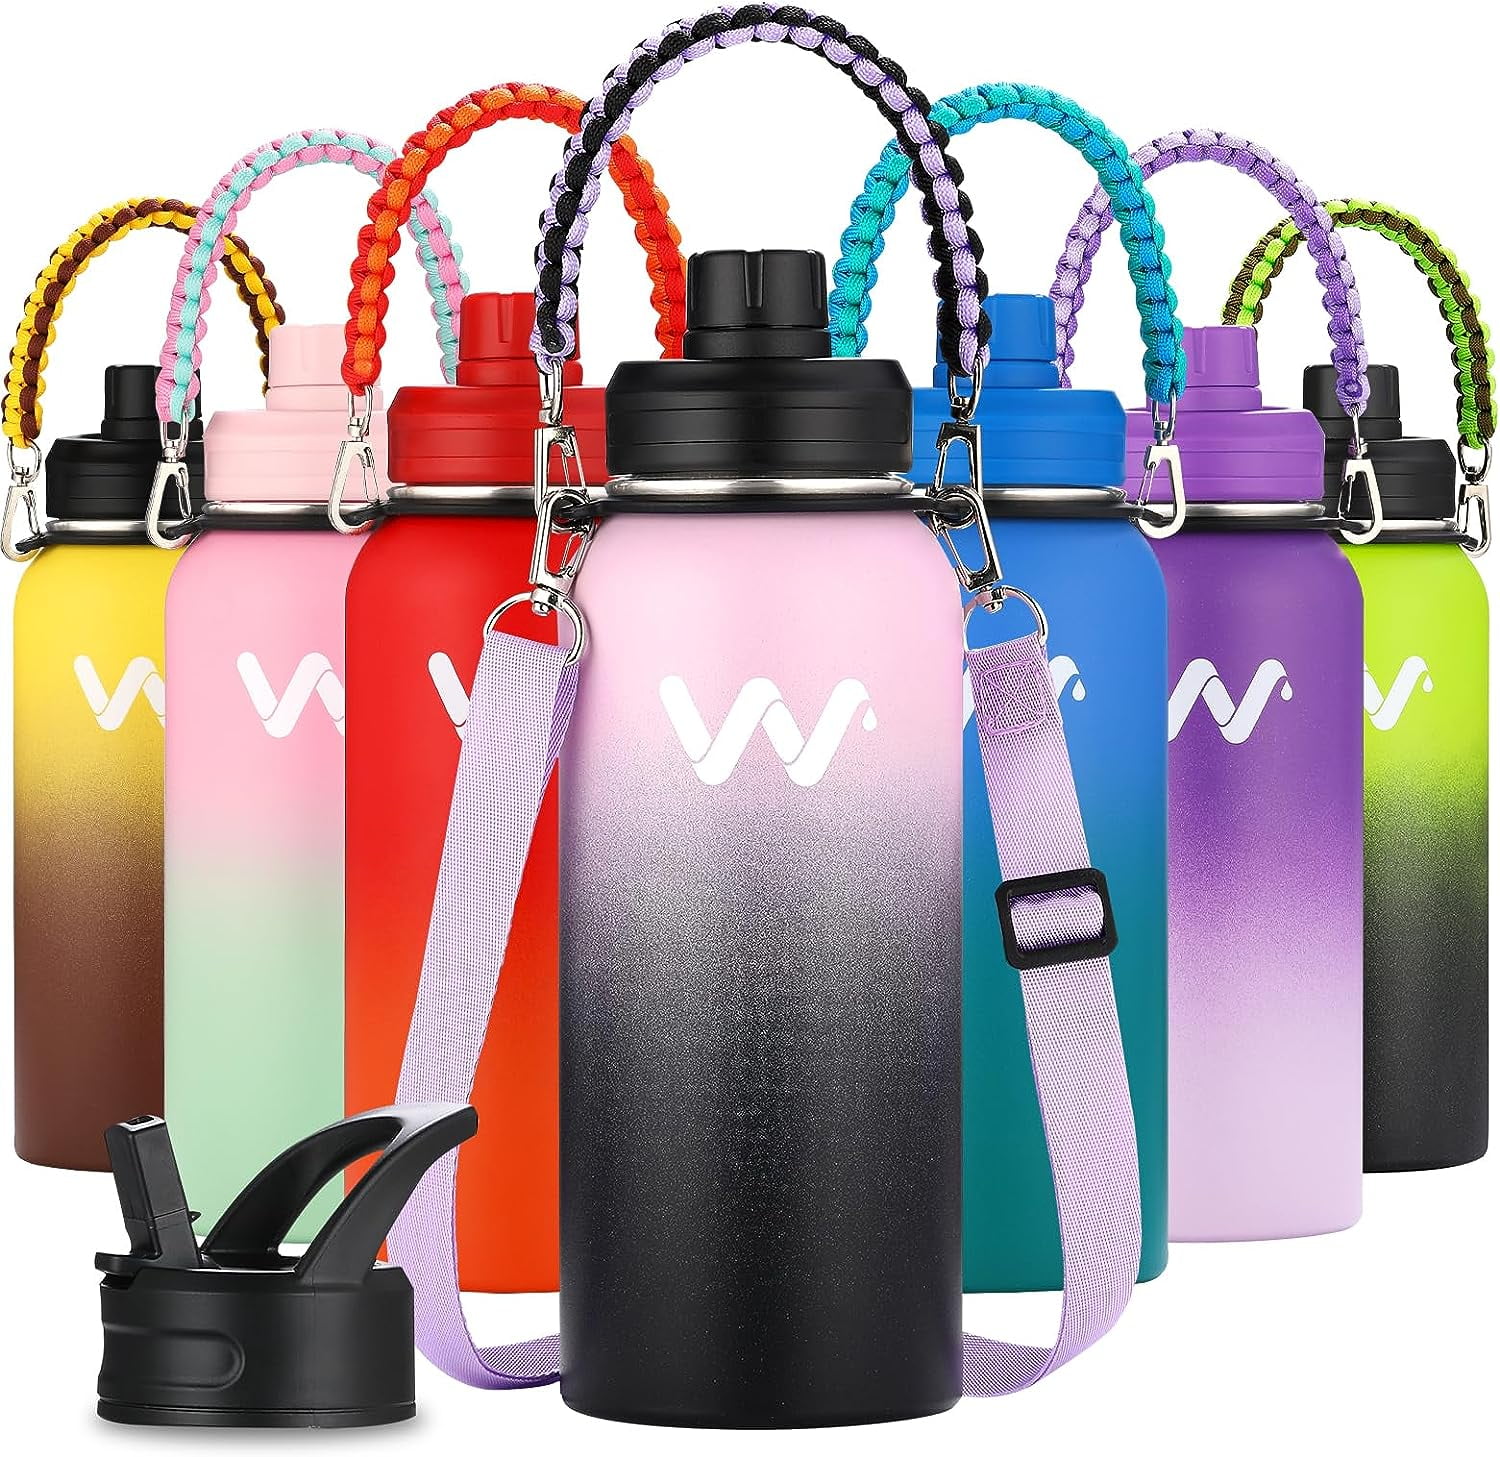 Hydroshield 2L Insulated Water Bottle: Leakproof, BPA-Free, Eco-Friendly –  Gym Giants